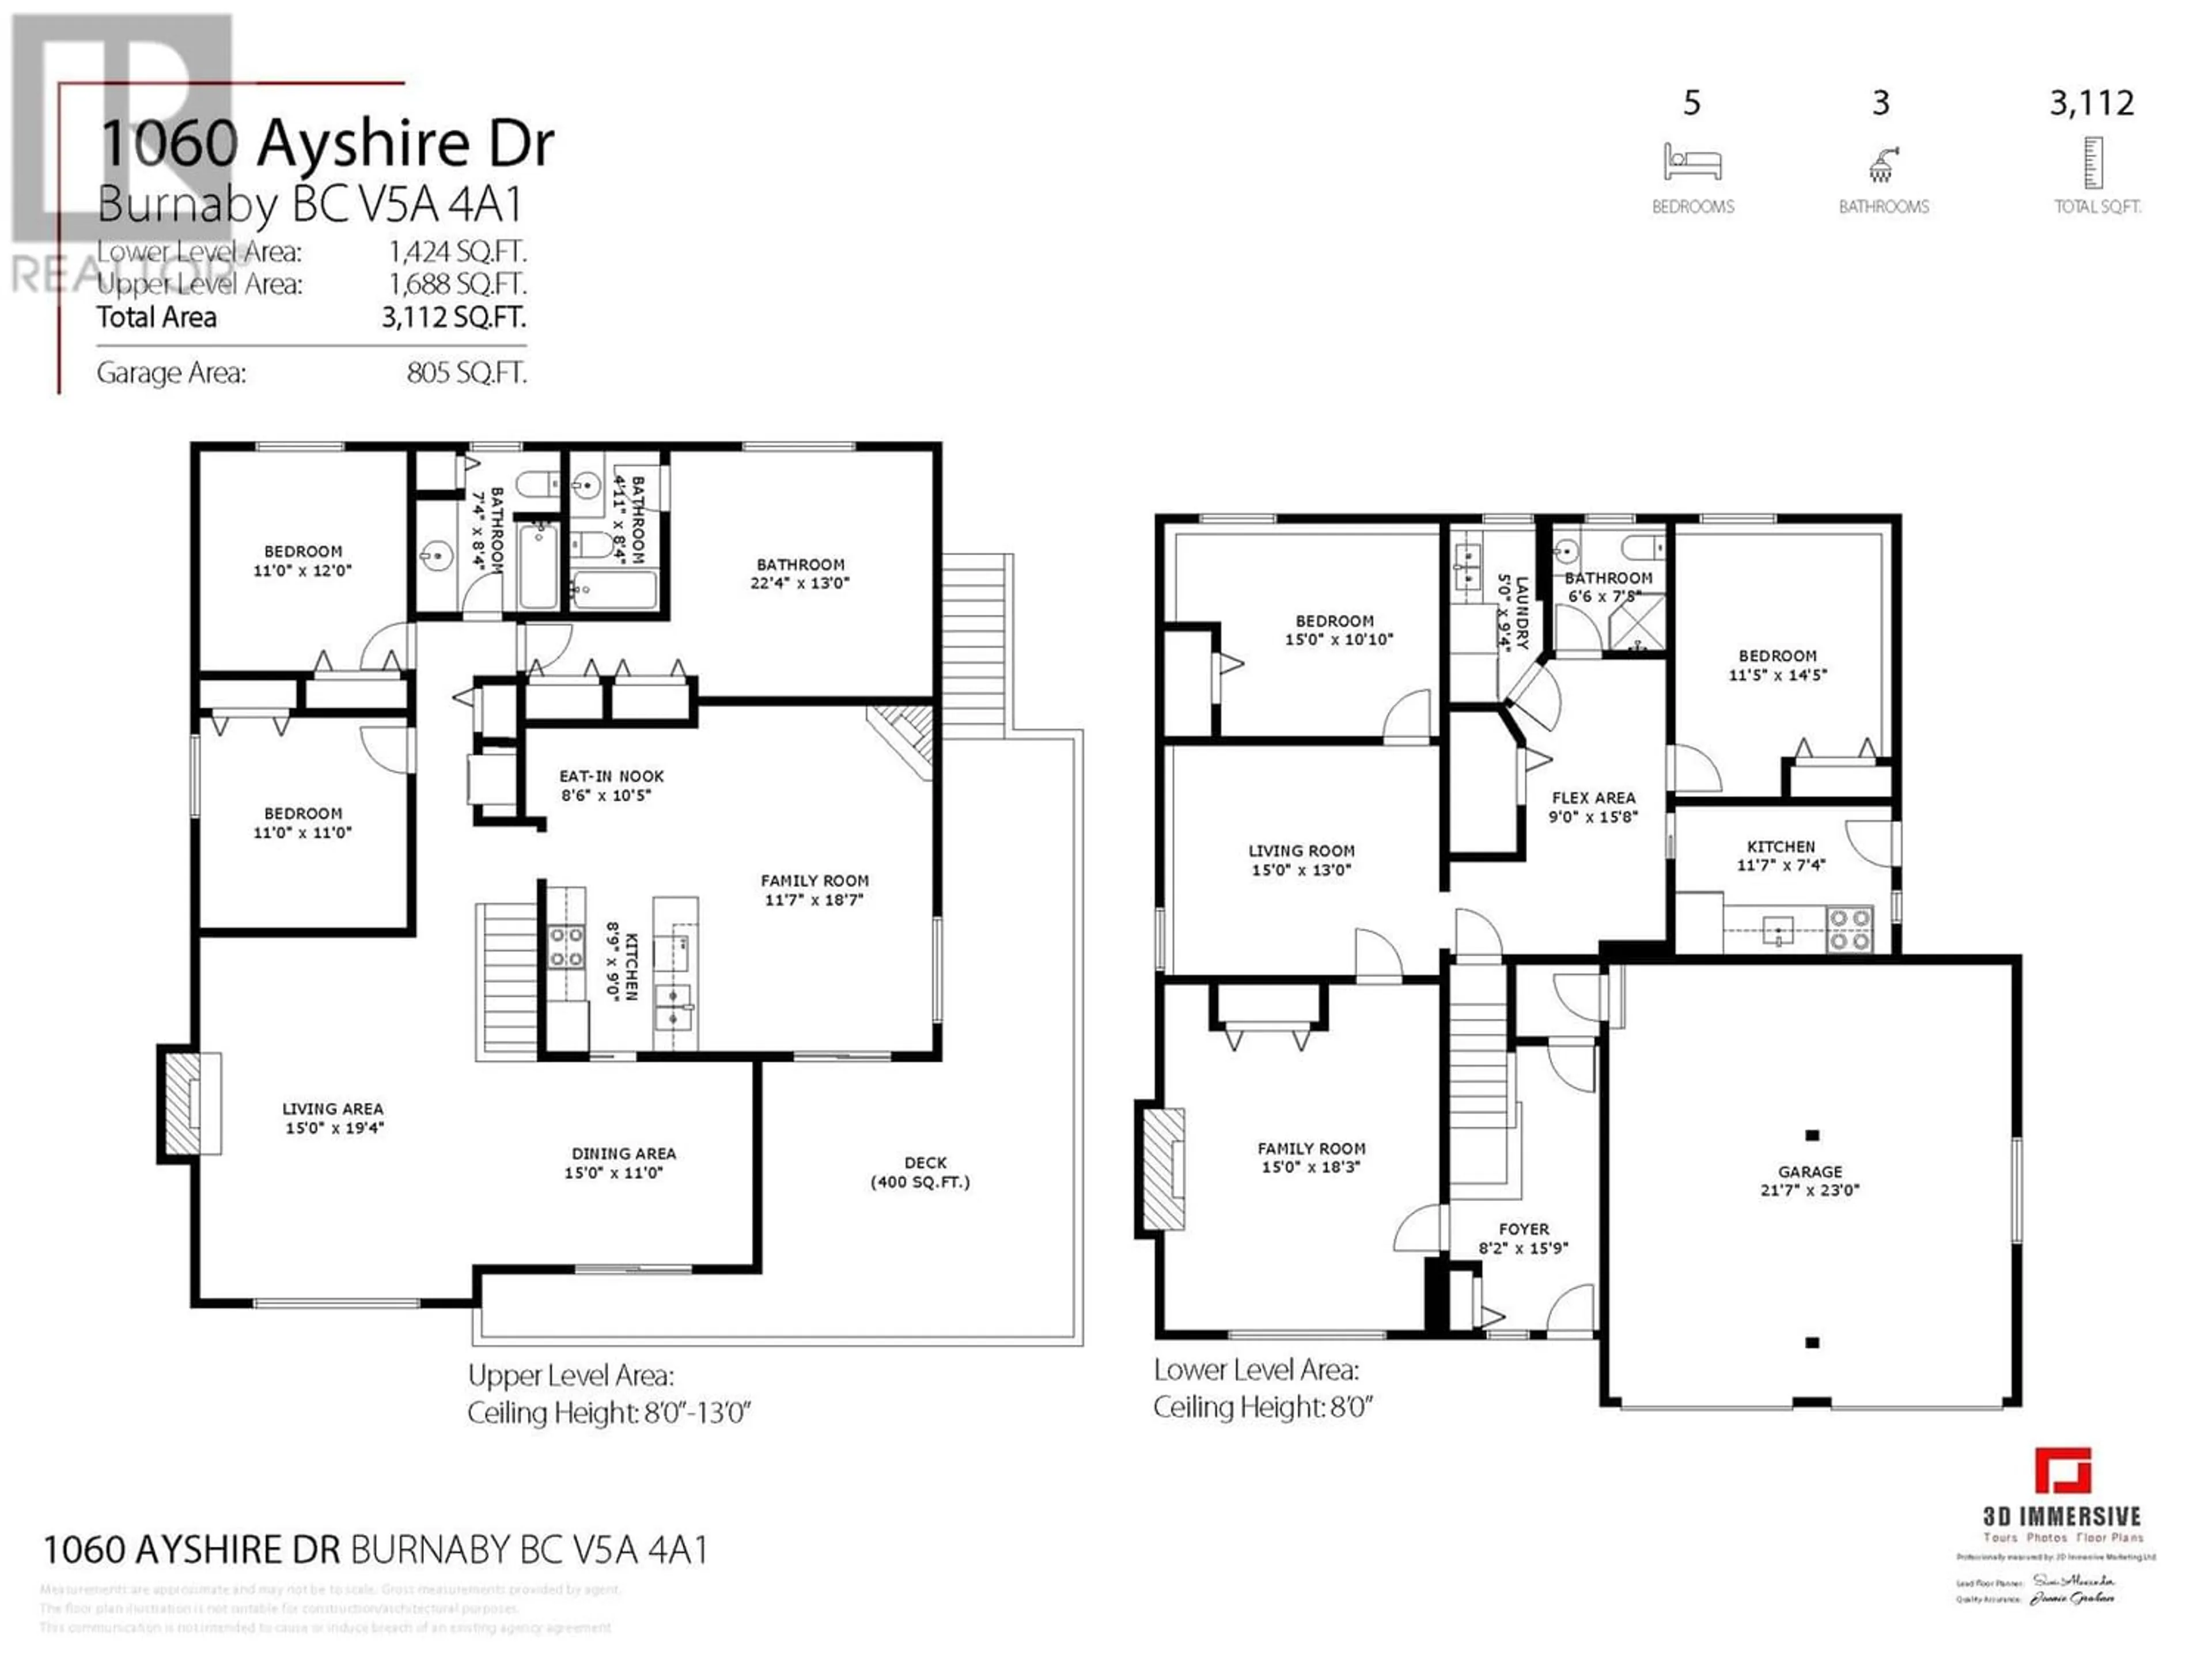 Floor plan for 1060 AYSHIRE DRIVE, Burnaby British Columbia V5A4A1